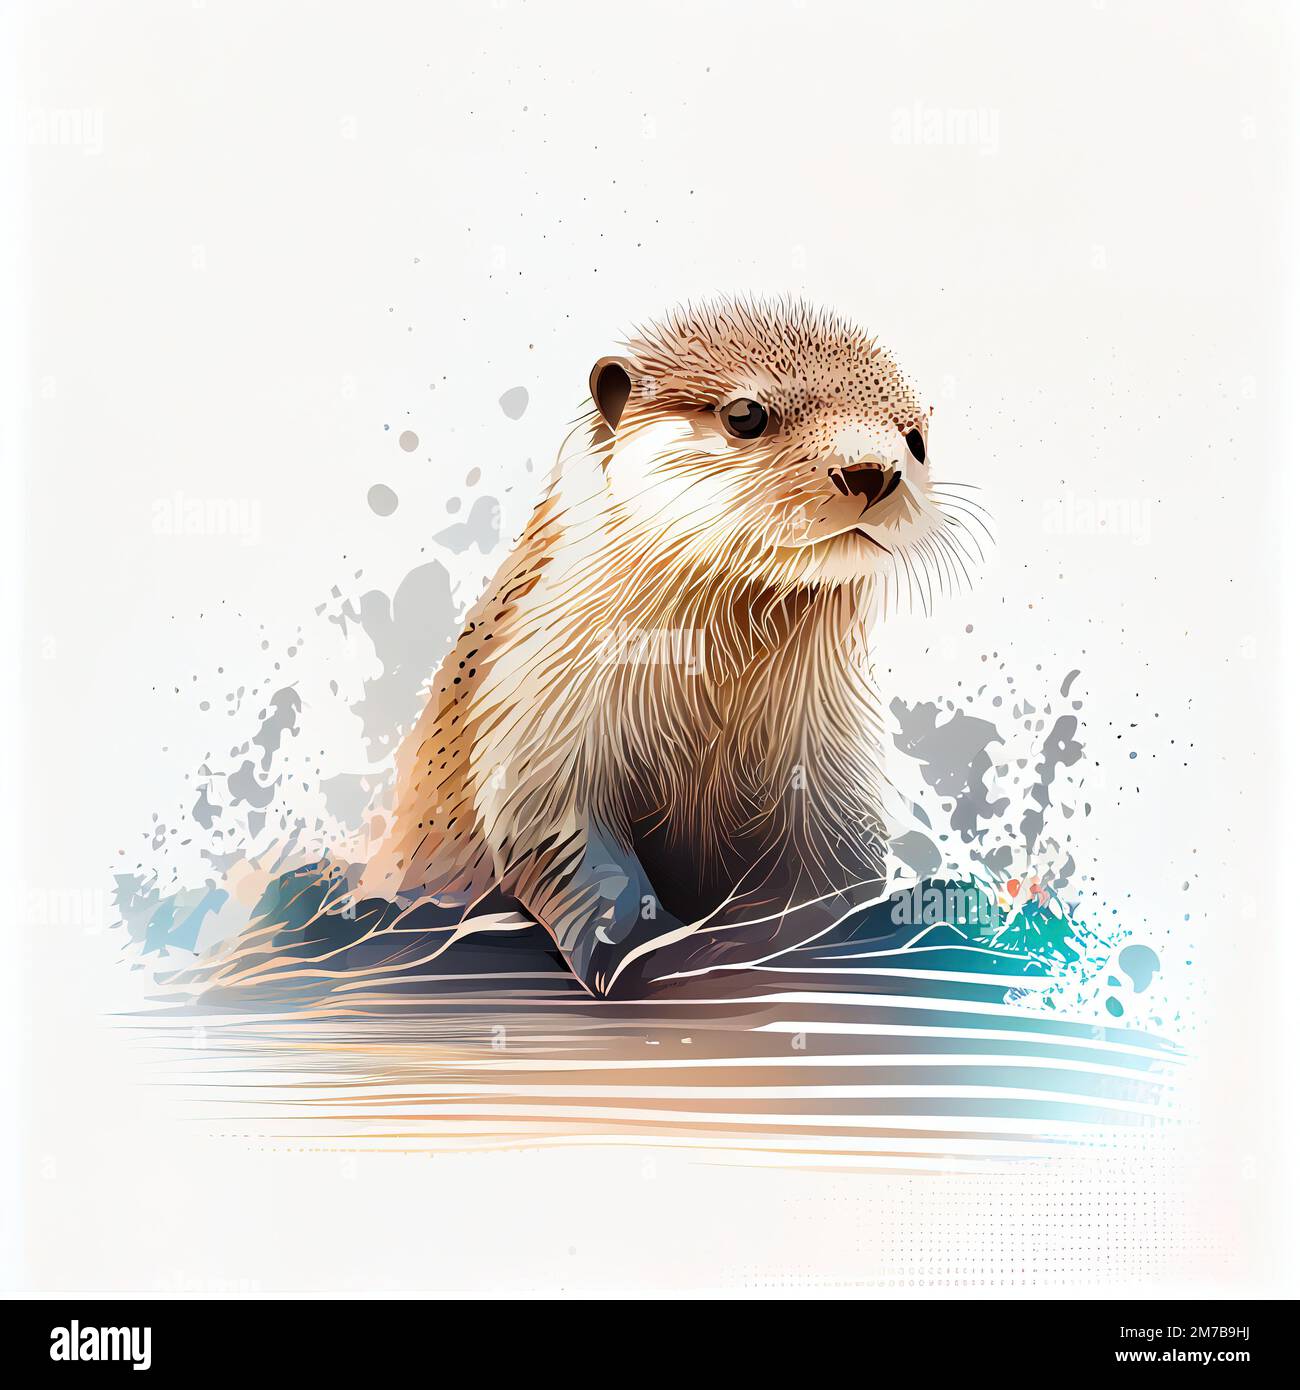 Cute otter Cut Out Stock Images & Pictures - Alamy